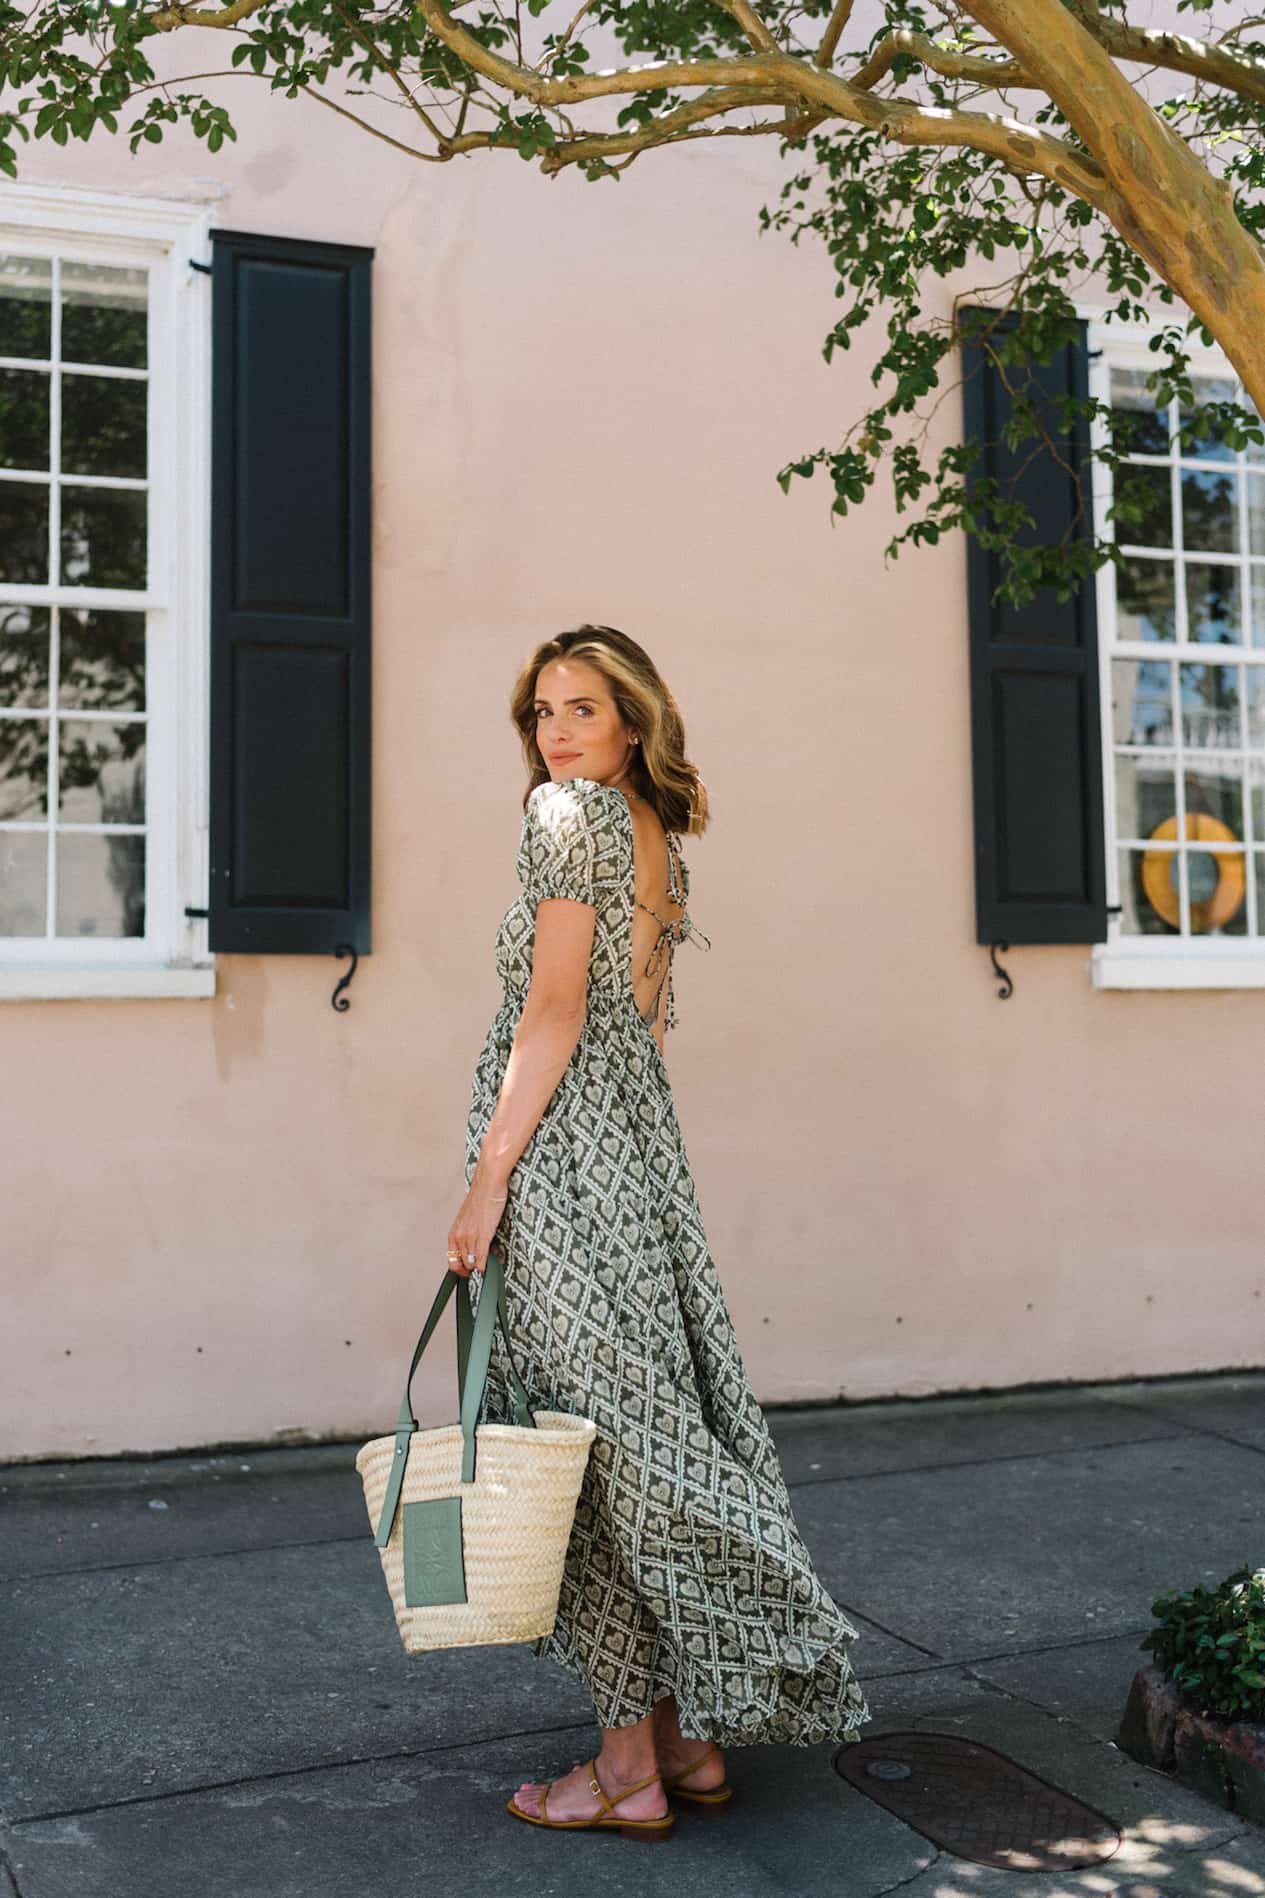 image of a woman standing on a sidewalk in front of a pink wall wearing a green maxi floral dress holding a woven tote bag